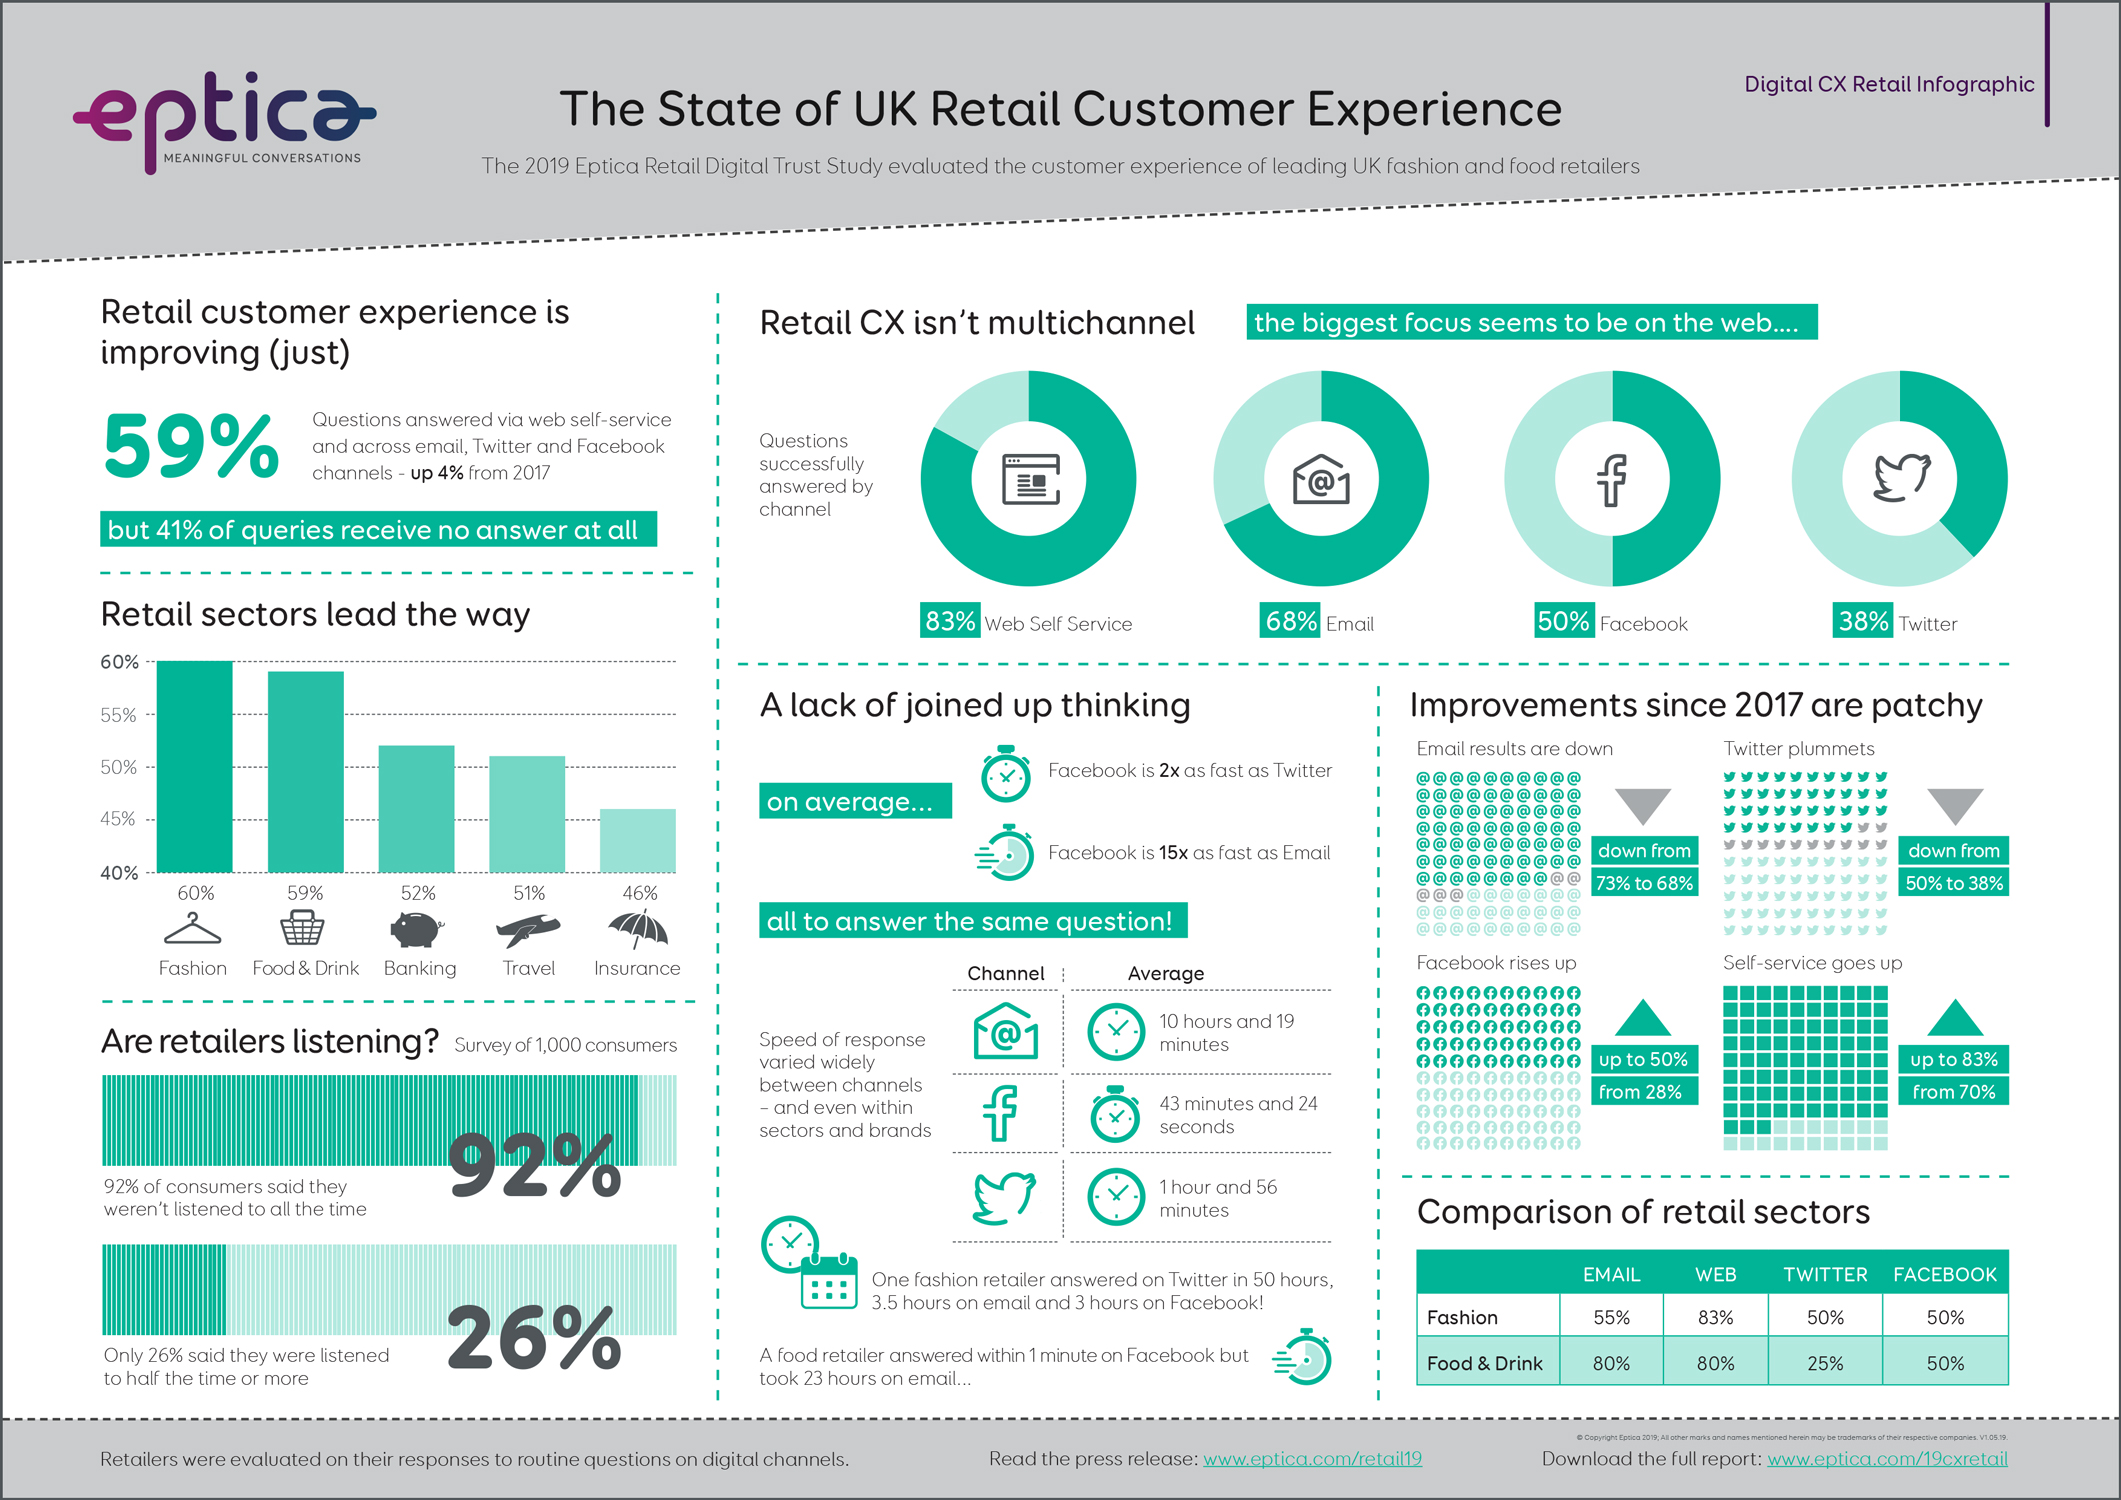 Eptica Infographic Improving Customer Experience Through Automation